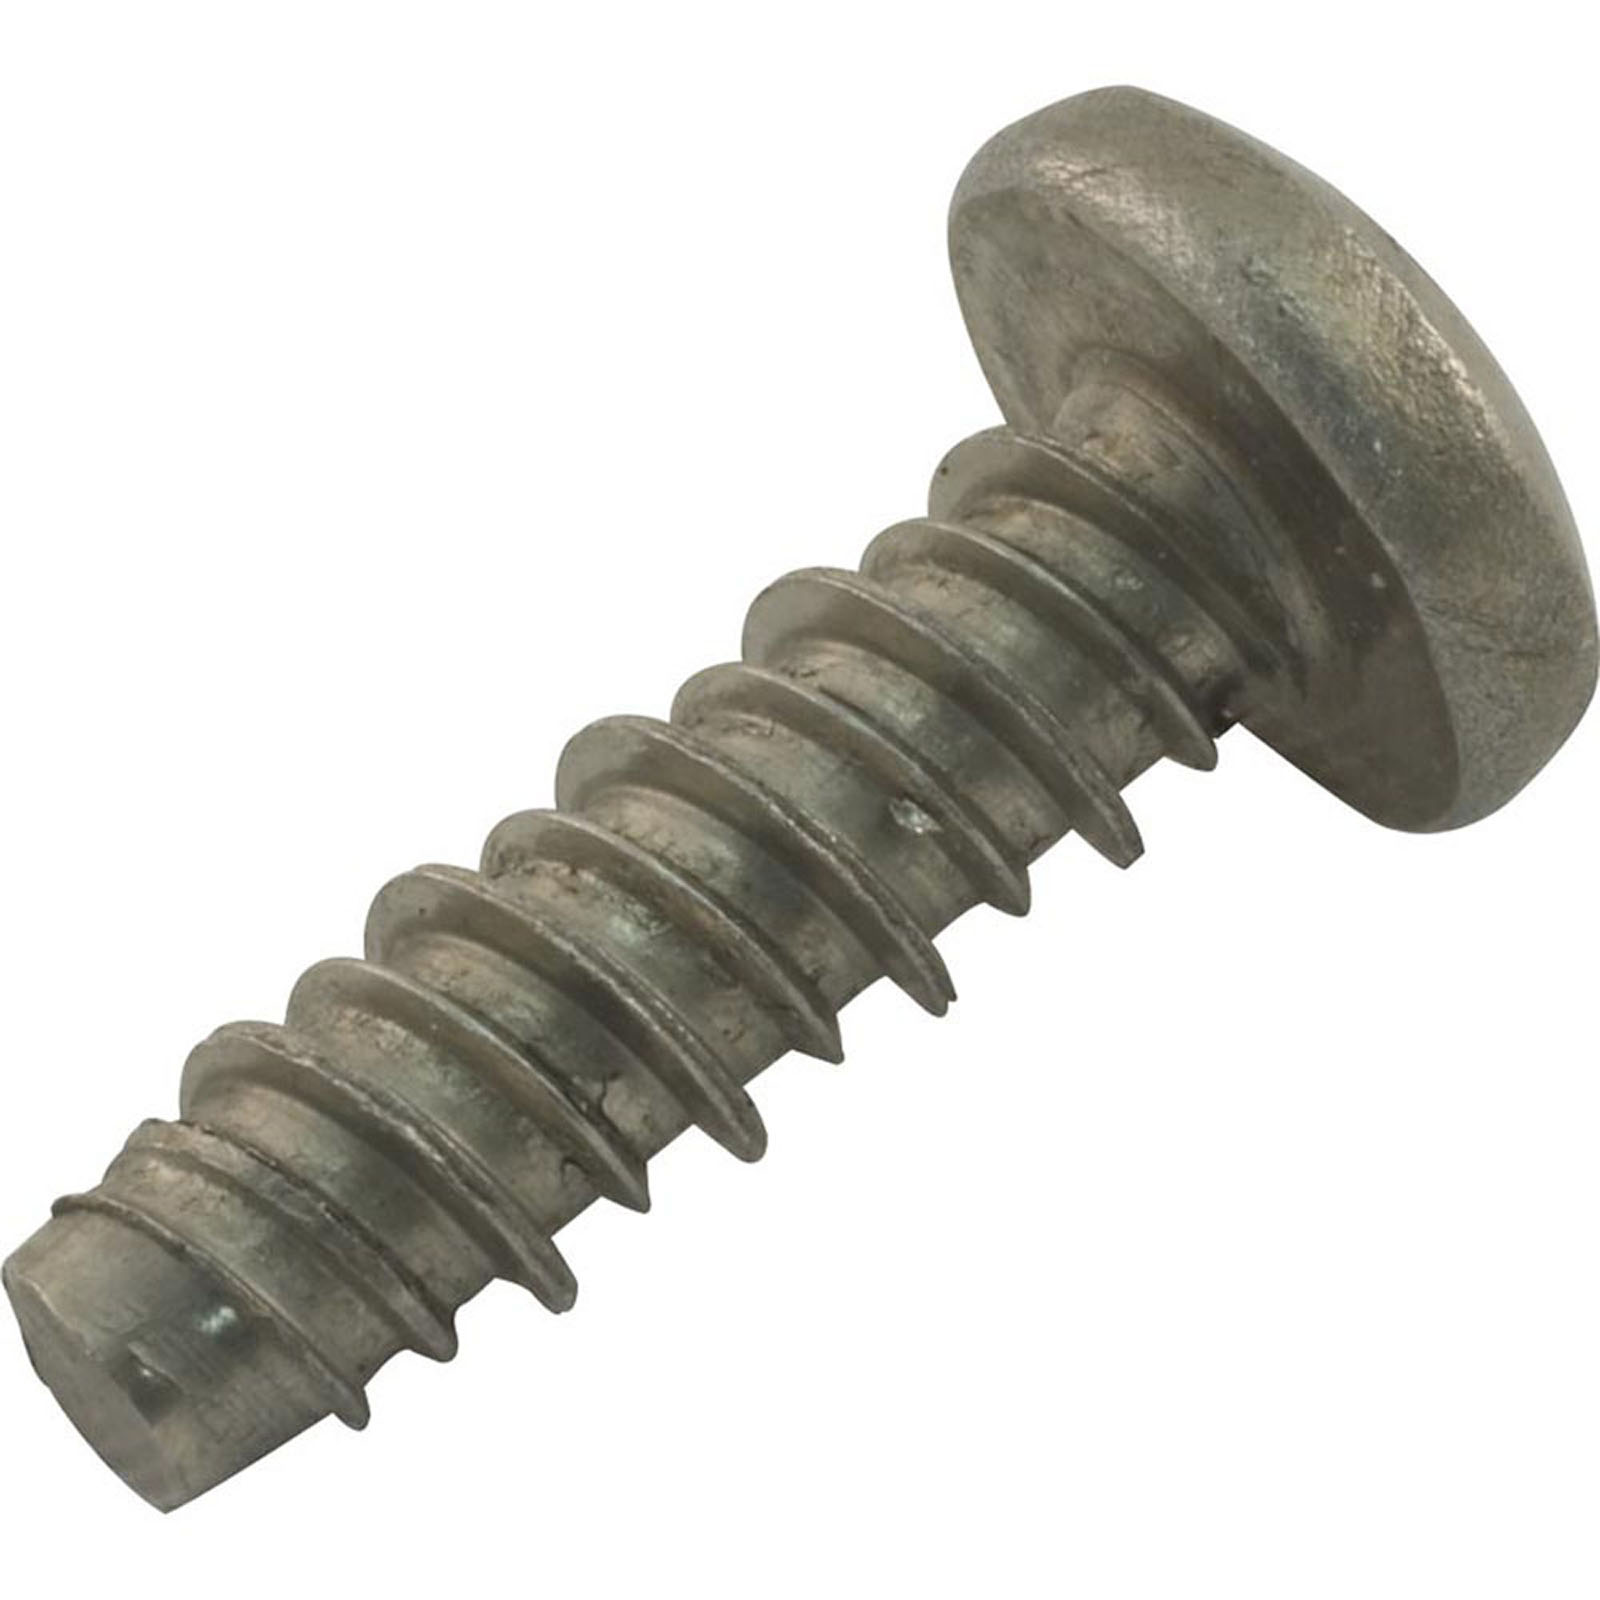 PENTAIR POOL PRODUCTS Screw, Pentair American Products, 13-16 x 3/4"